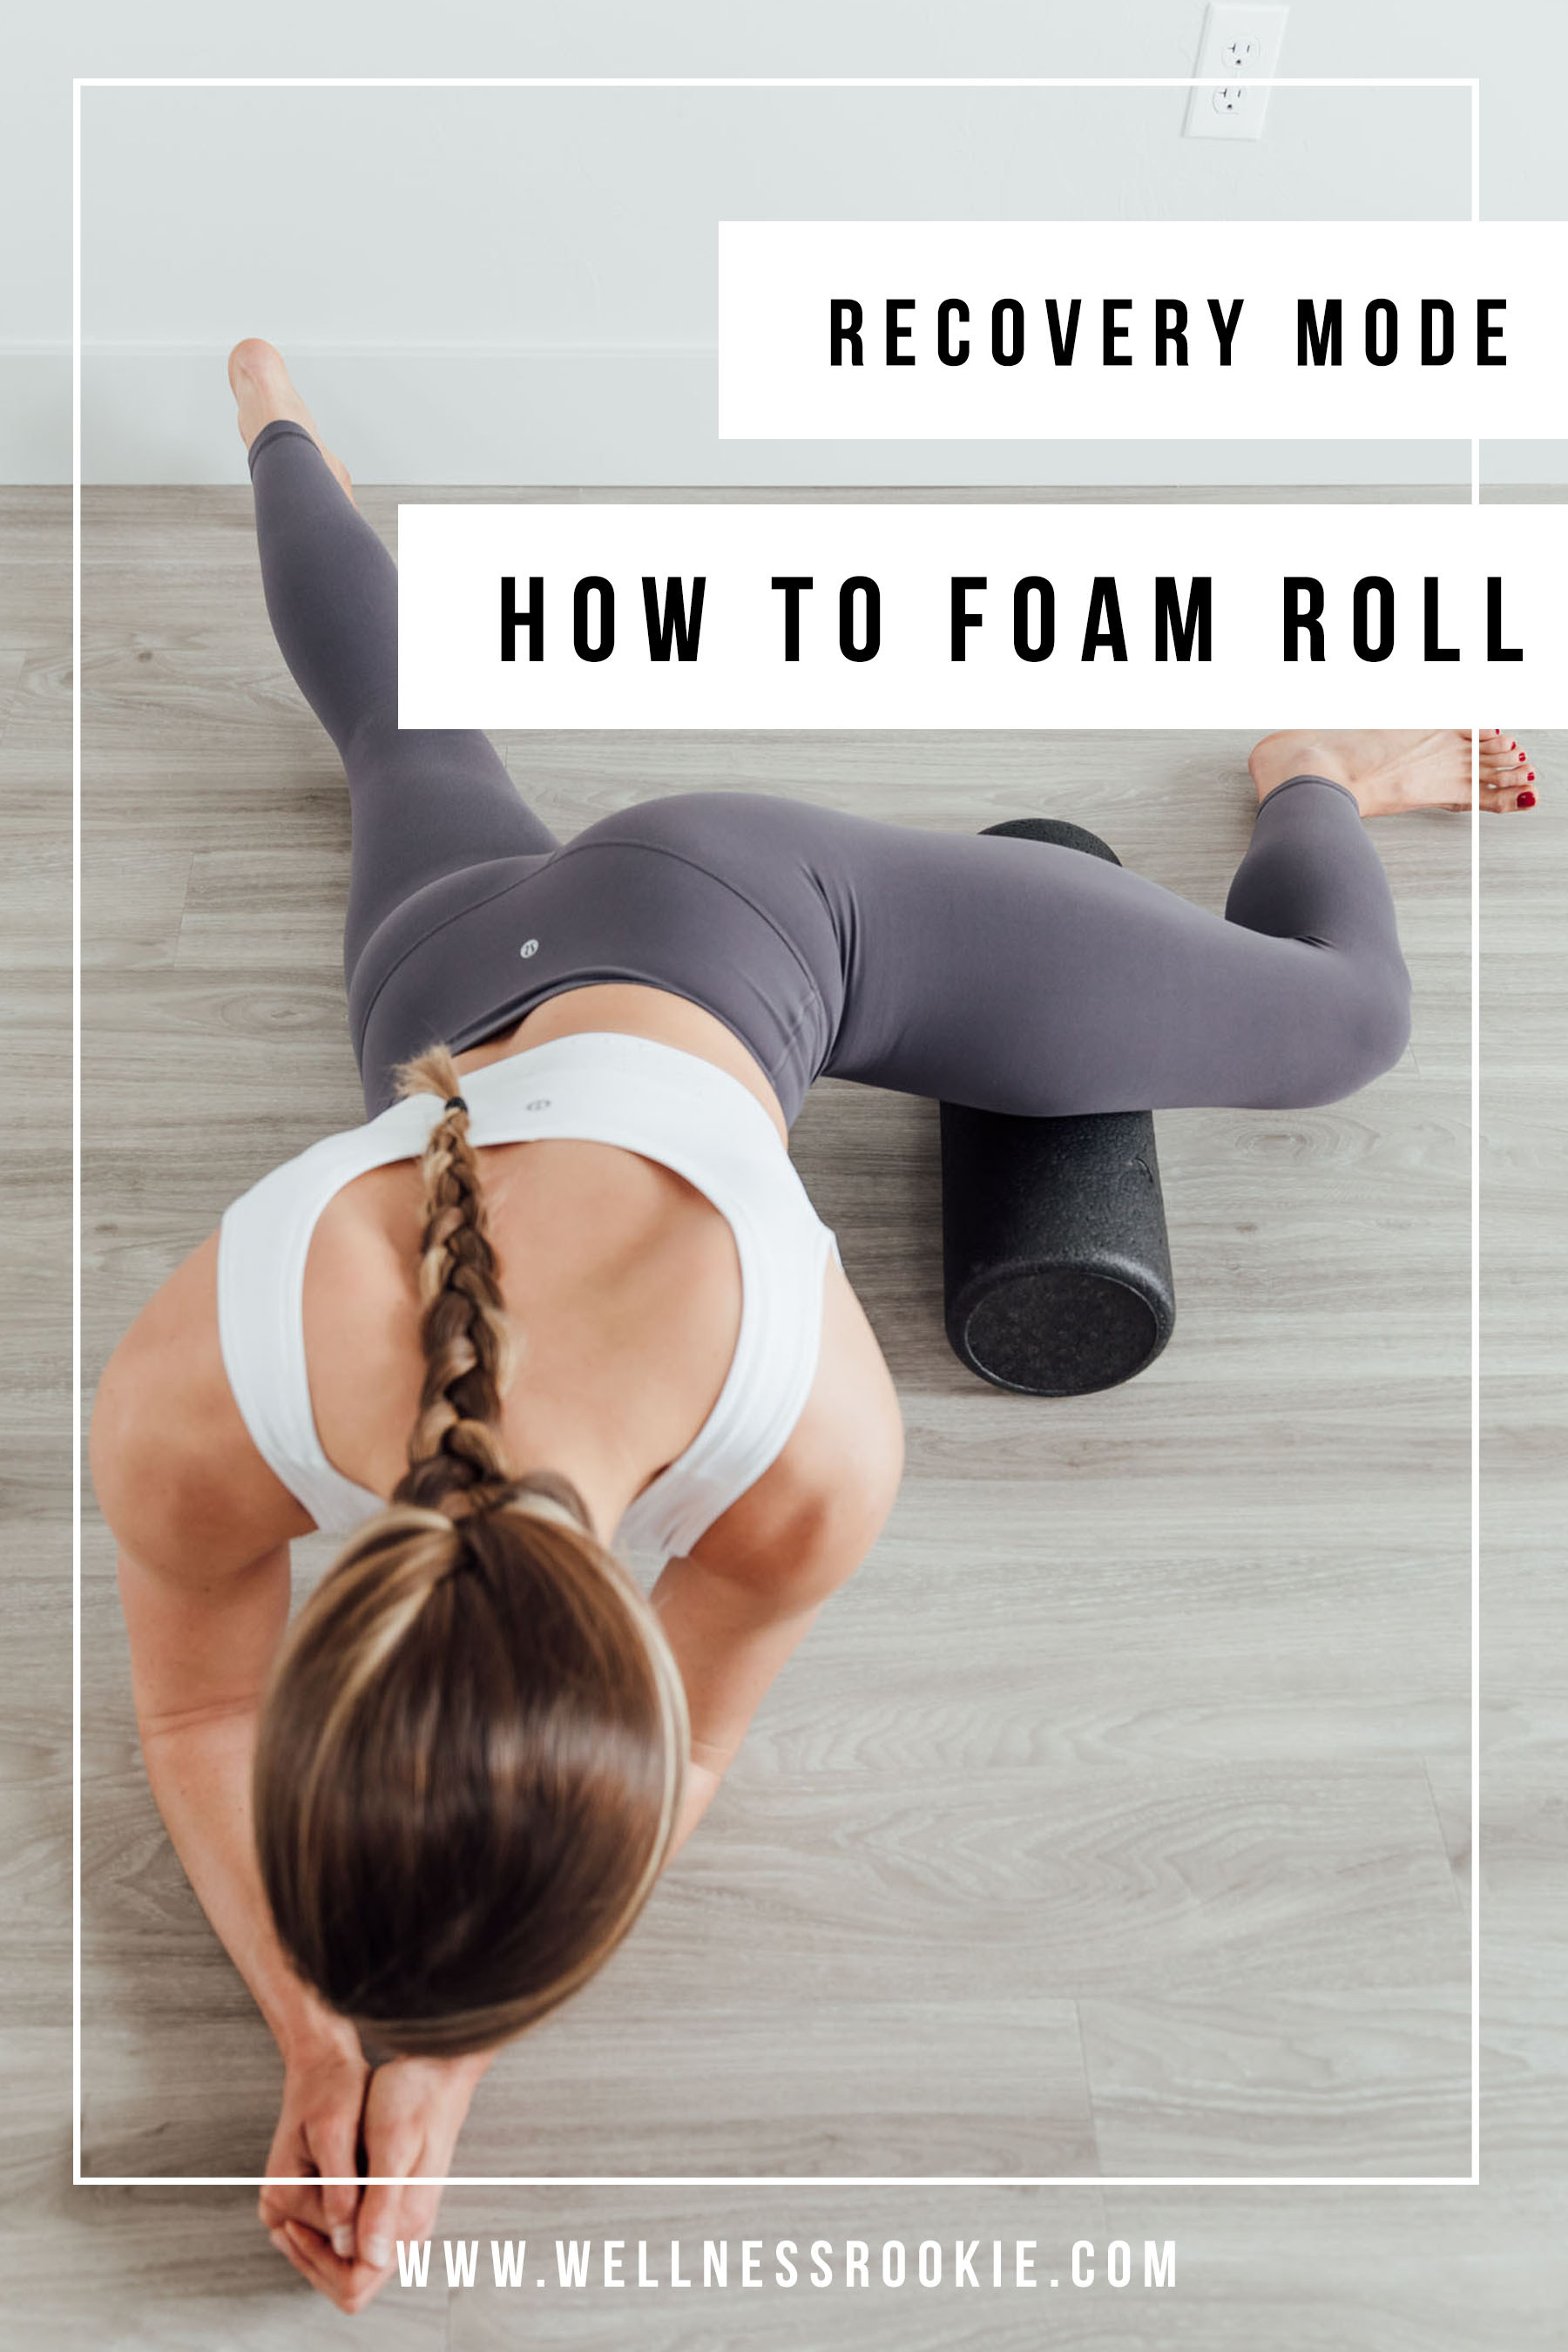 The Wellness Rookie-A Rookie's Guide to Foam Rolling